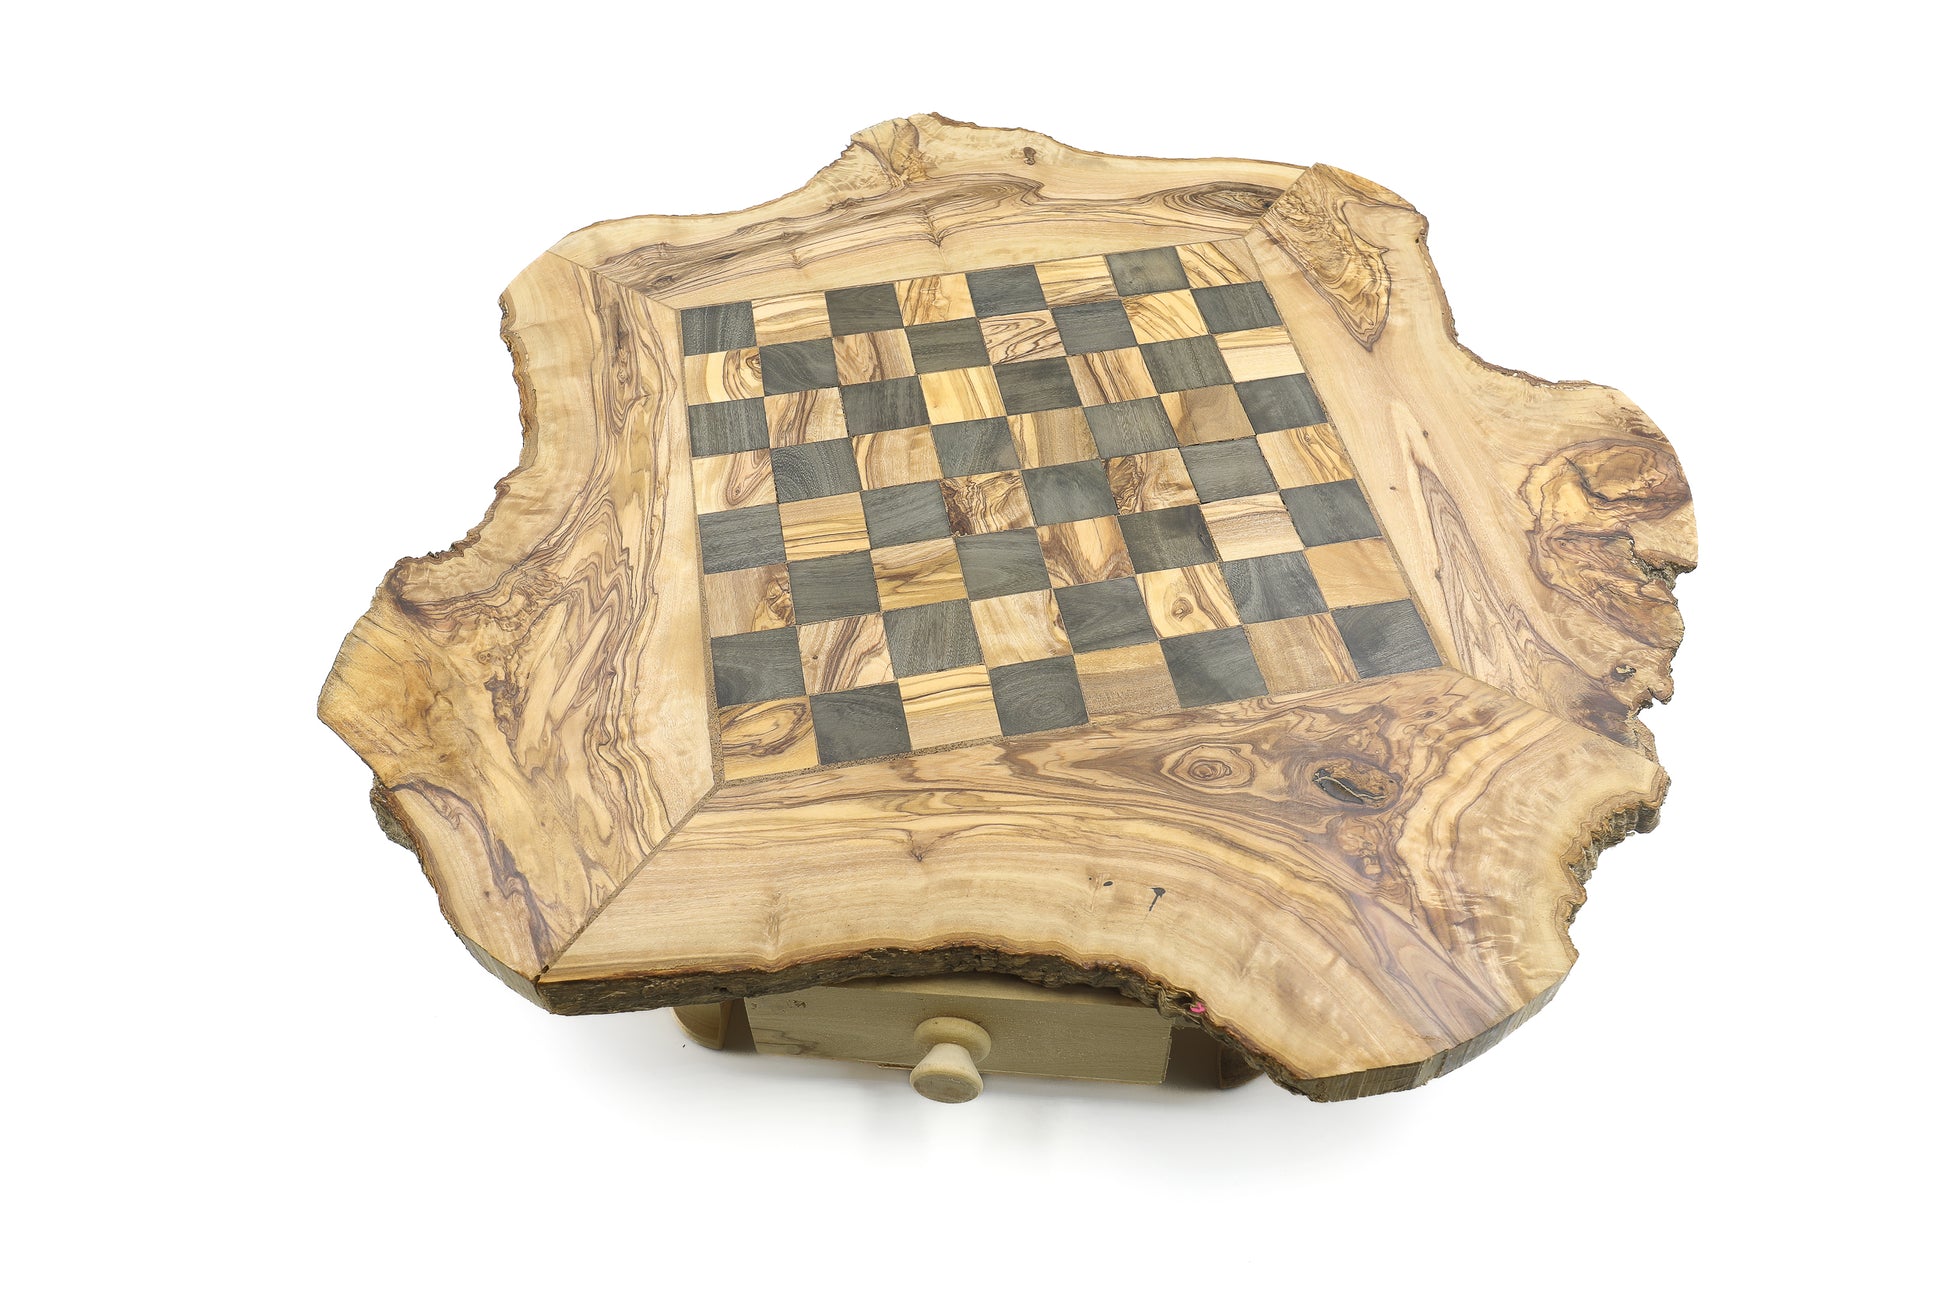 Olive wood chess set for a timeless and enjoyable game, complete with board and pieces